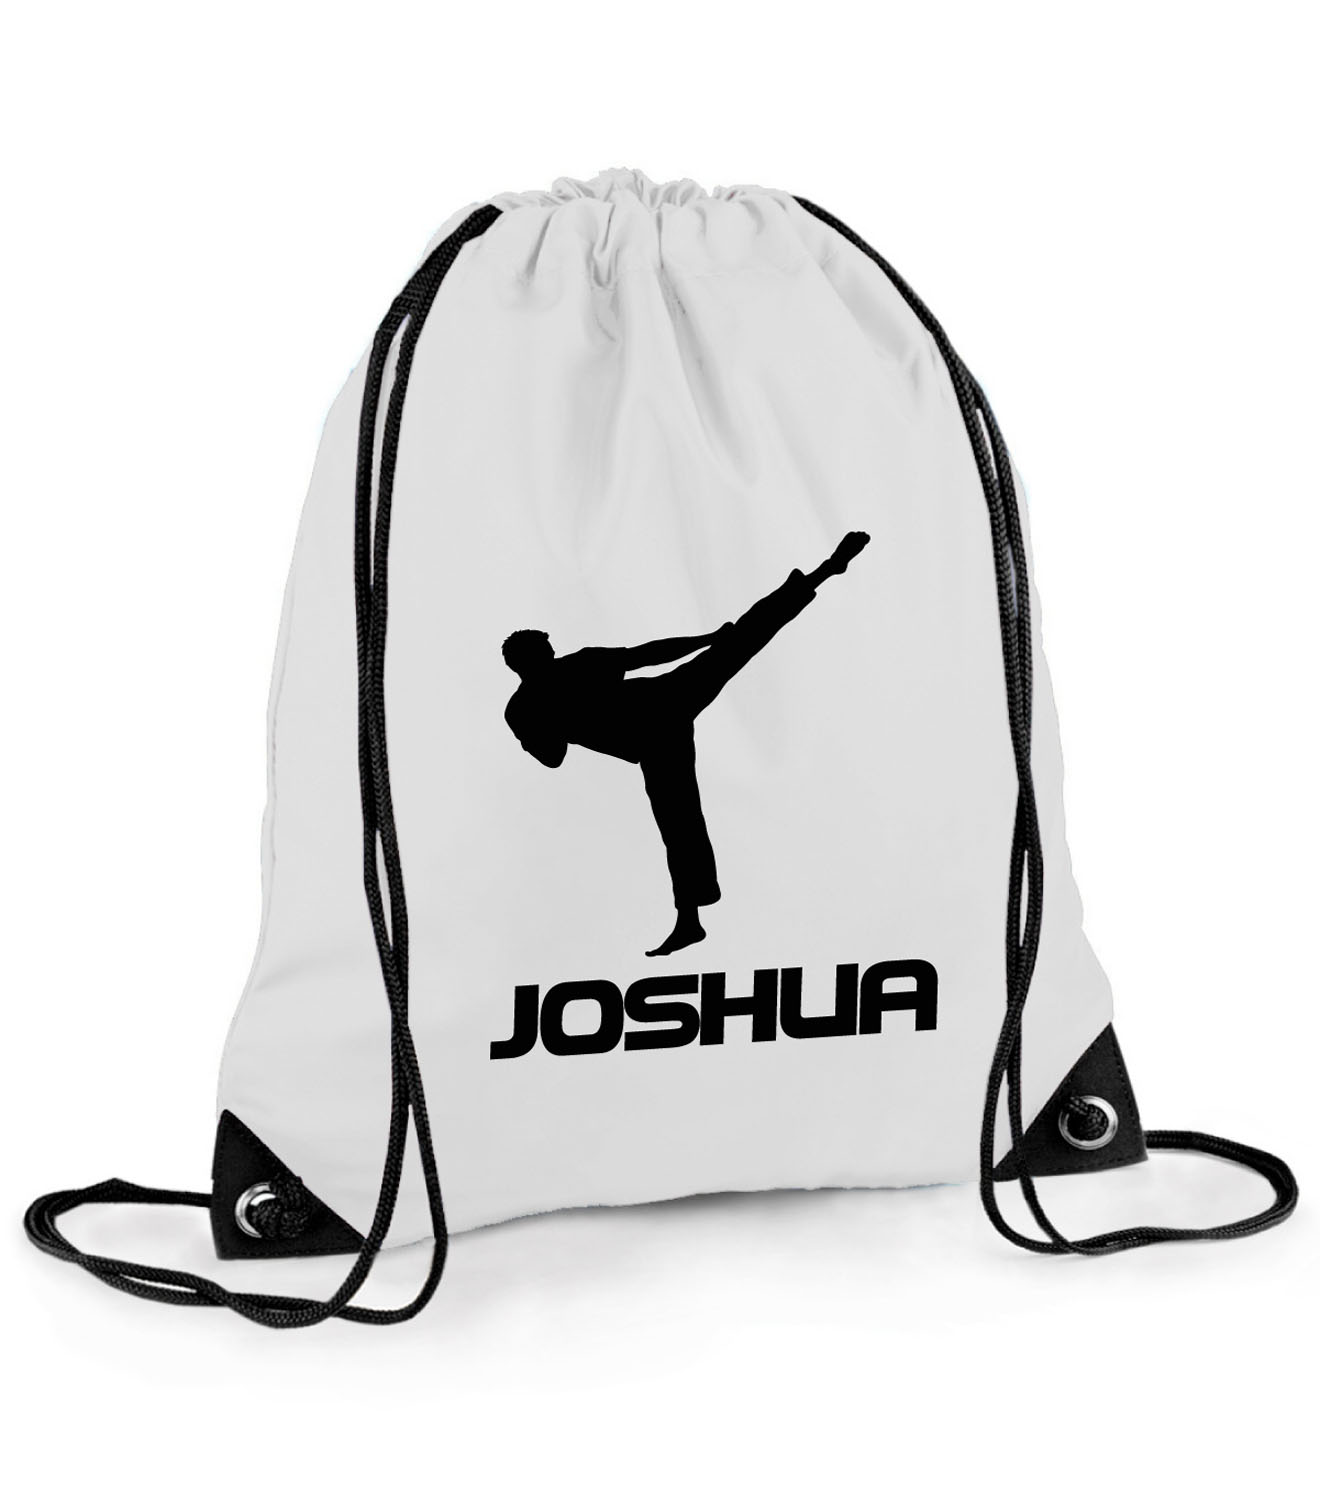 Welcome to Budomartamerica - Martial Arts & Combat Sports Distributor  Tokaido Karate WKF Sports Gear Bag, Pink - WKF APPROVED GEAR - KARATE  Welcome to Budomartamerica - Martial Arts & Combat Sports Distributor